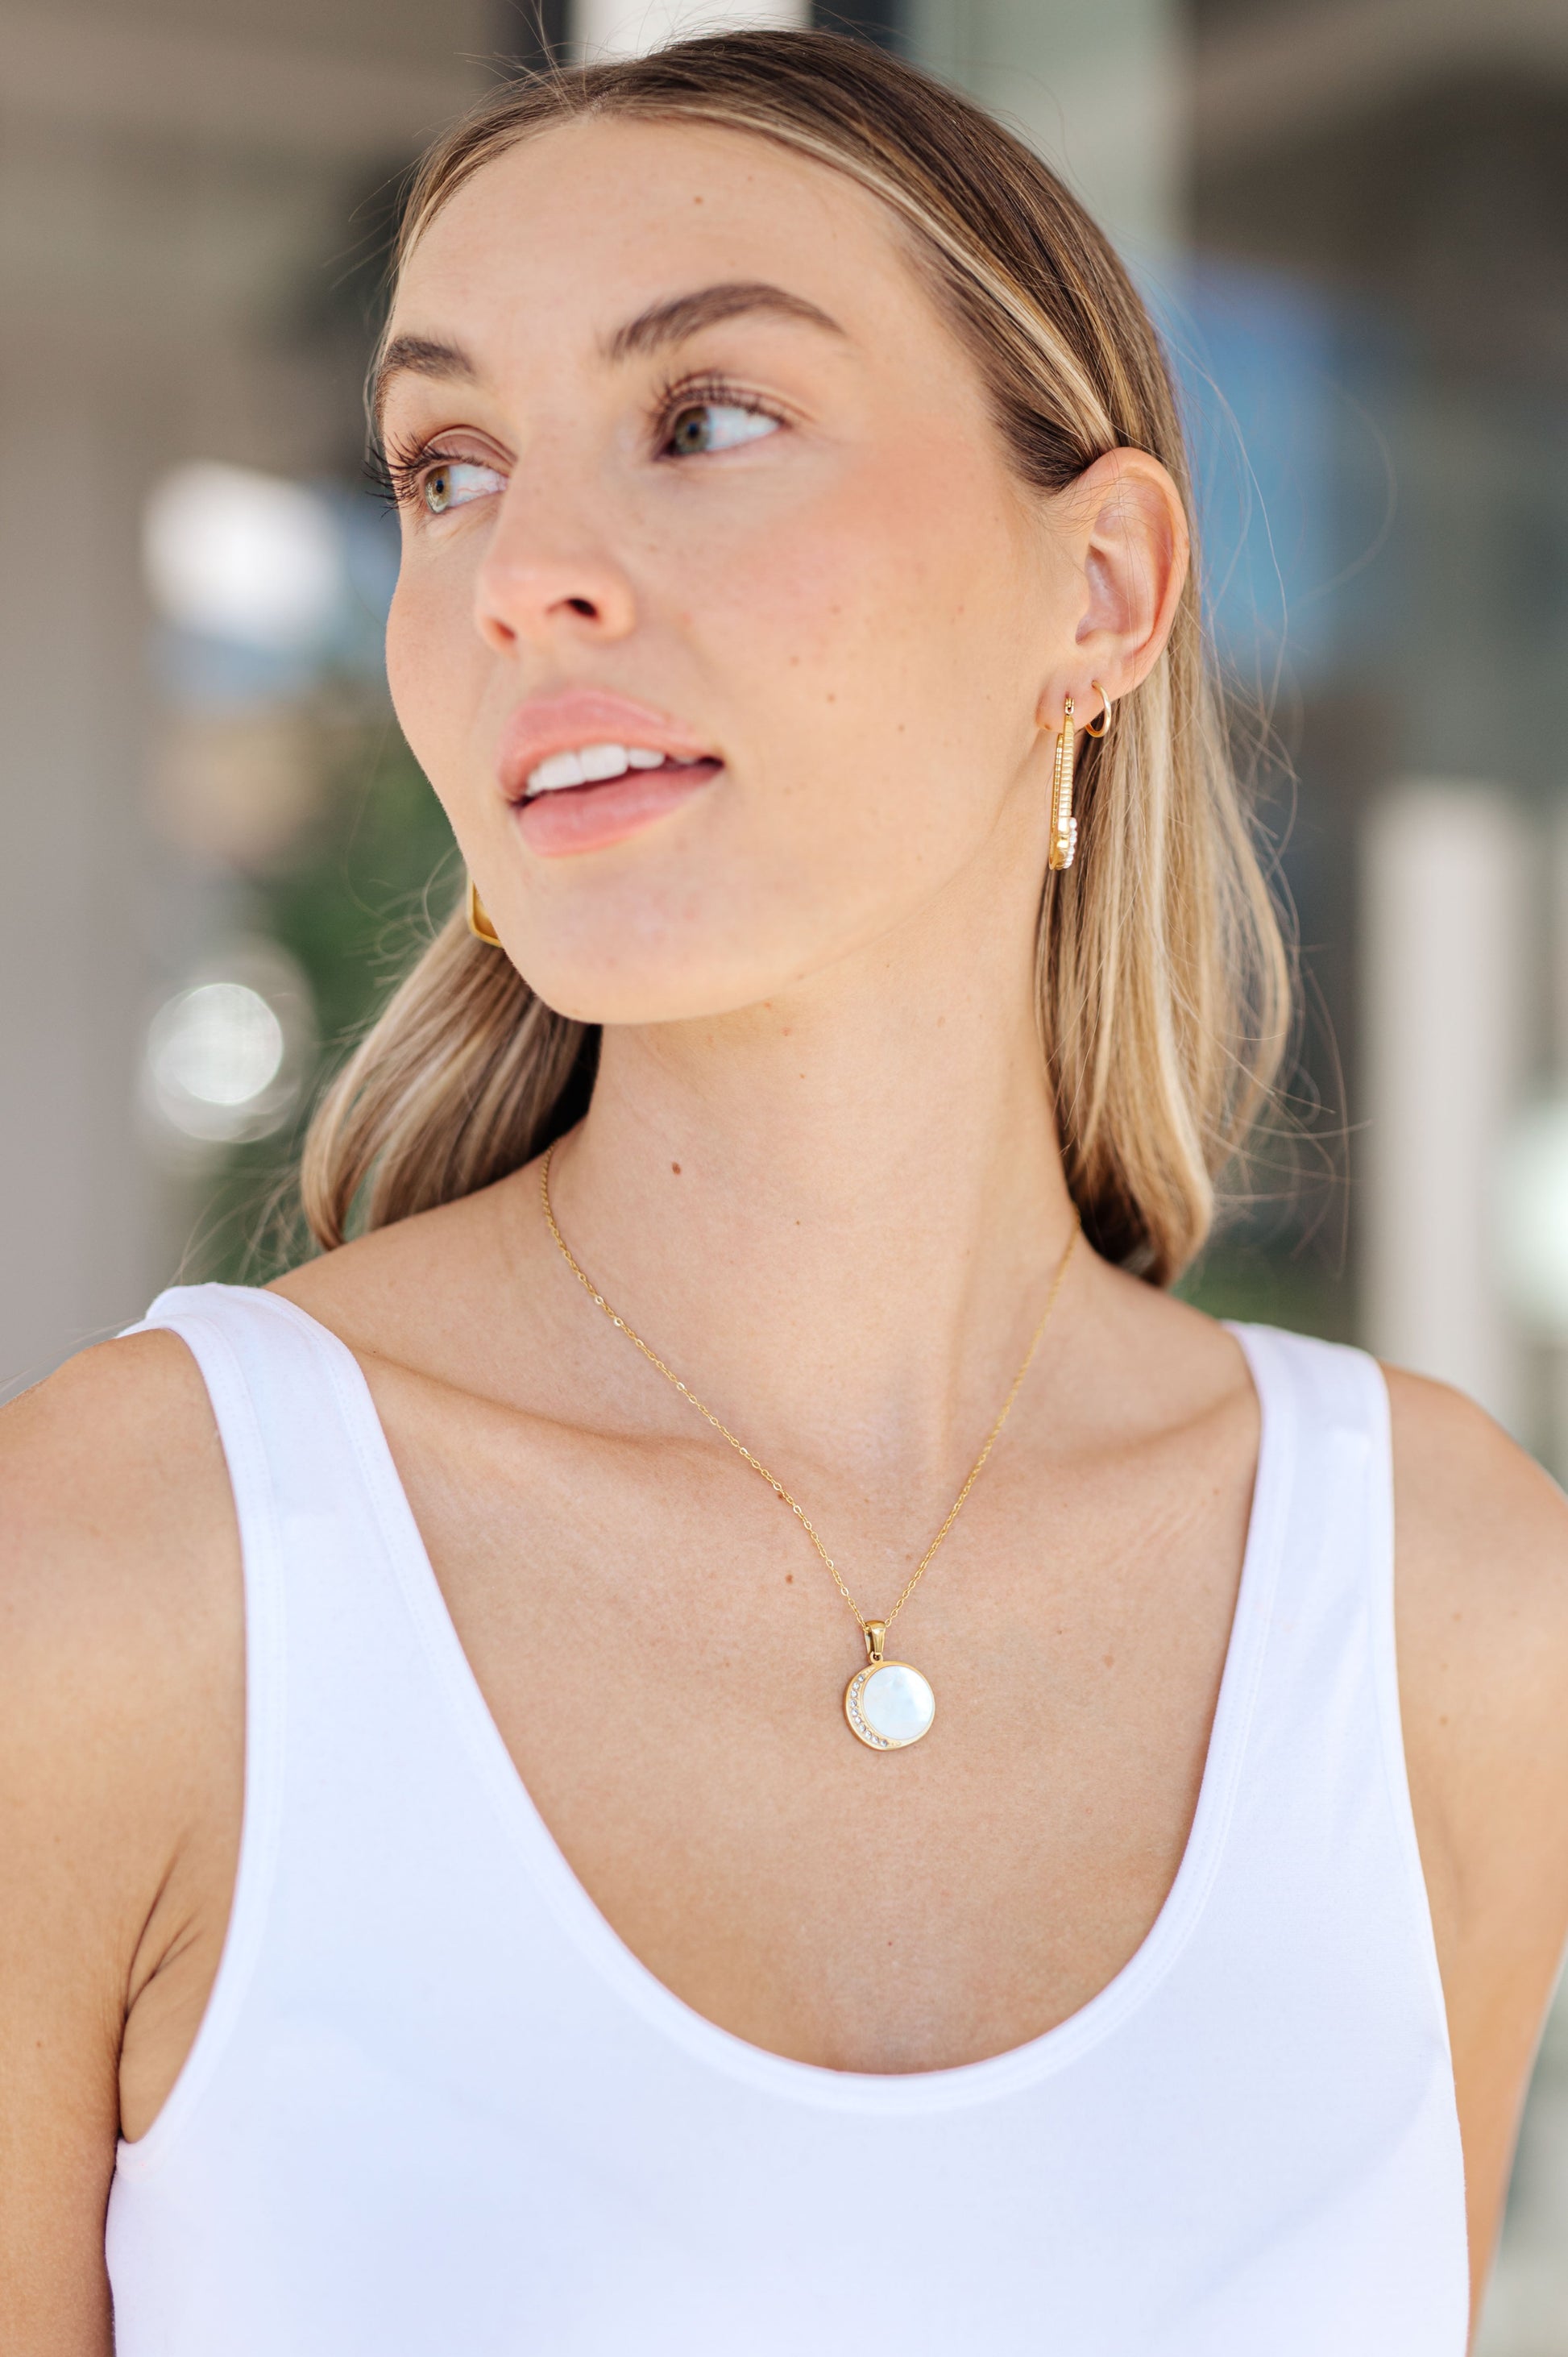 Our Forgotten Promises Gold Plated Necklace is perfect for adding a touch of elegance to your look. Crafted with 18k gold plated link chain and featuring mounted stones in a crescent moon pendant, this necklace is sure to make a statement. Wear it on any special occasion for a timeless look.